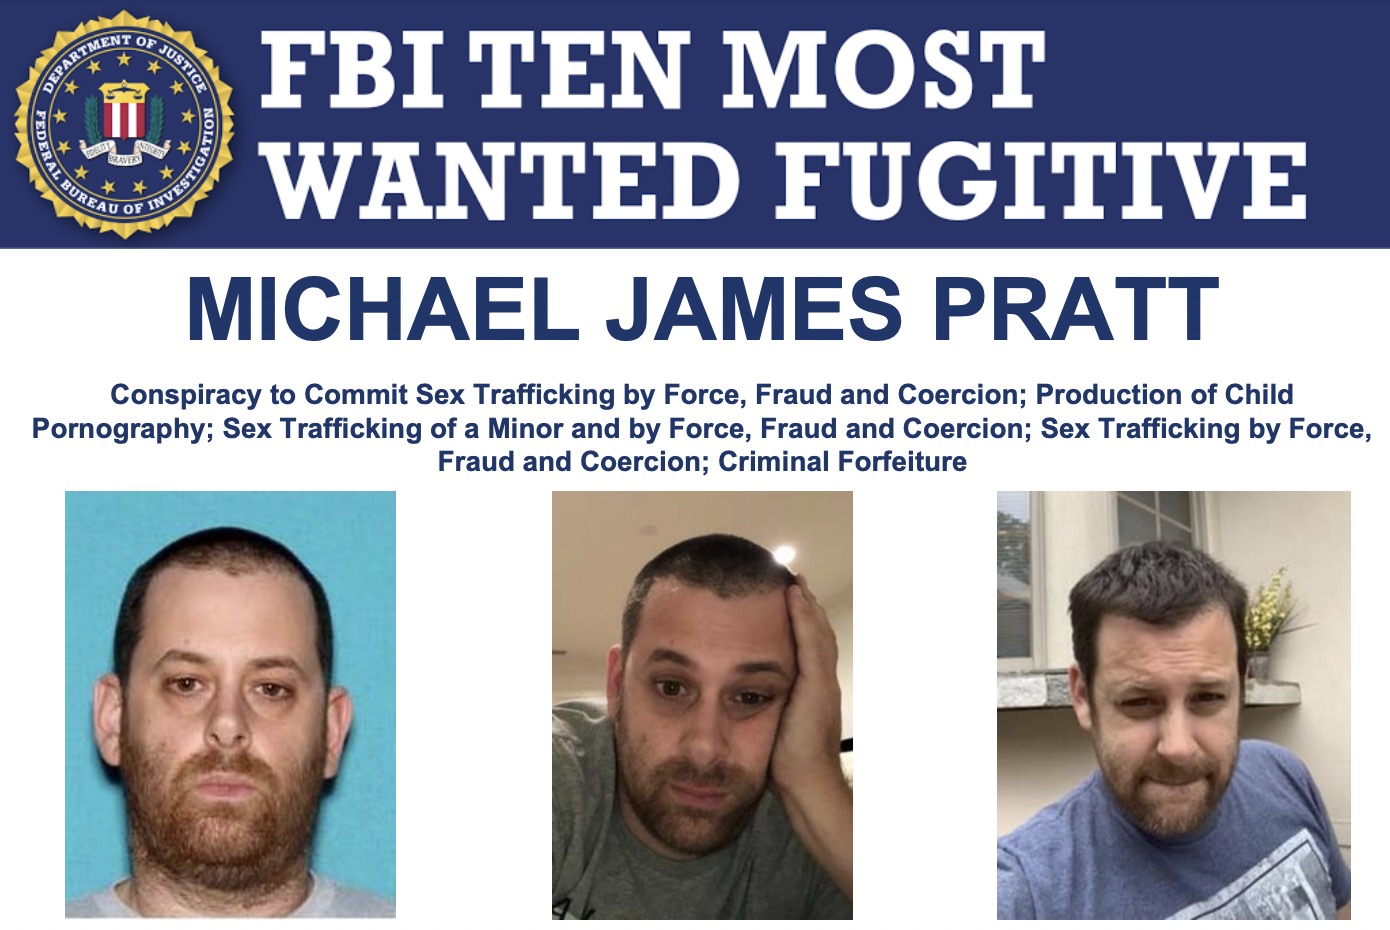 GirlsDoPorn founder, on the run for 3 years, now on FBI's Ten Most Wanted  list | Ars Technica